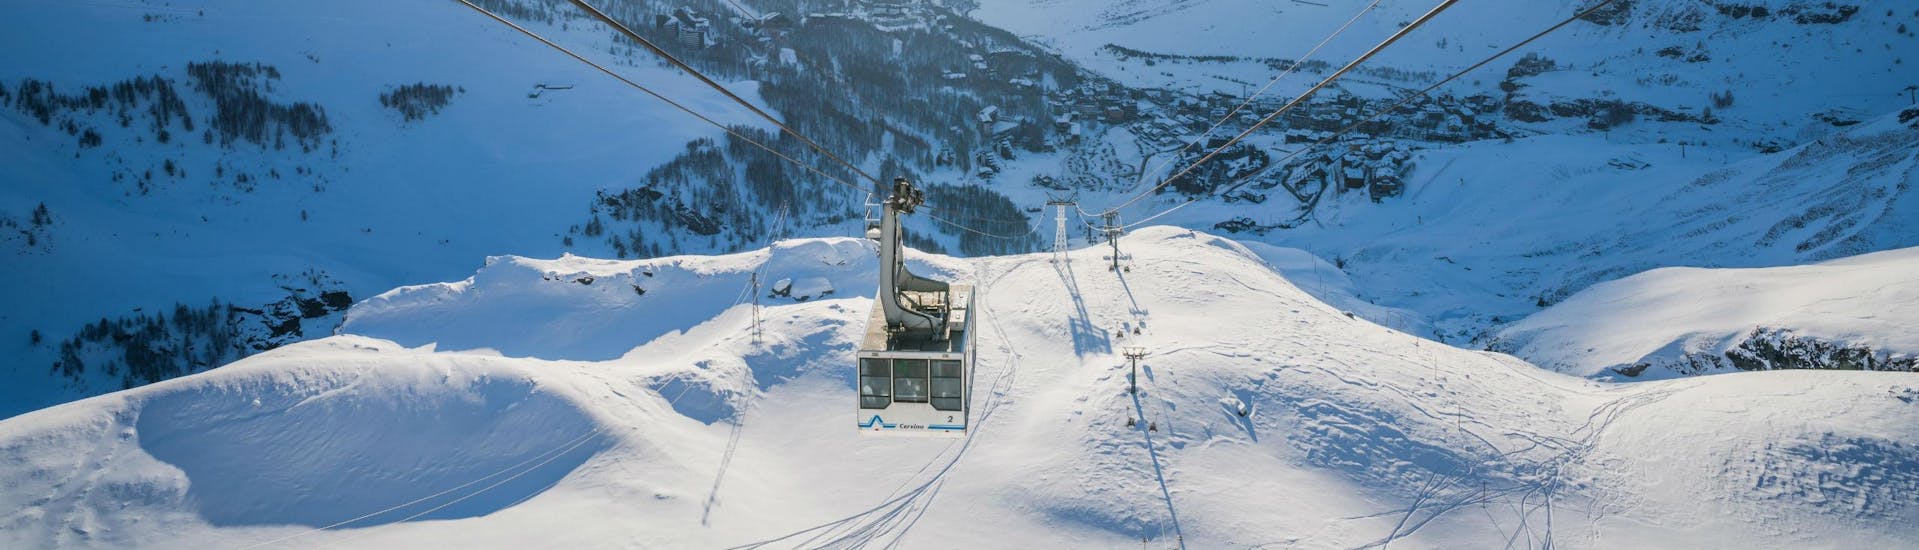 An image of a cable car ascending the mountain in the italian ski resort of Cervinia, where visitors can learn to ski during their ski lessons provided by local ski schools.